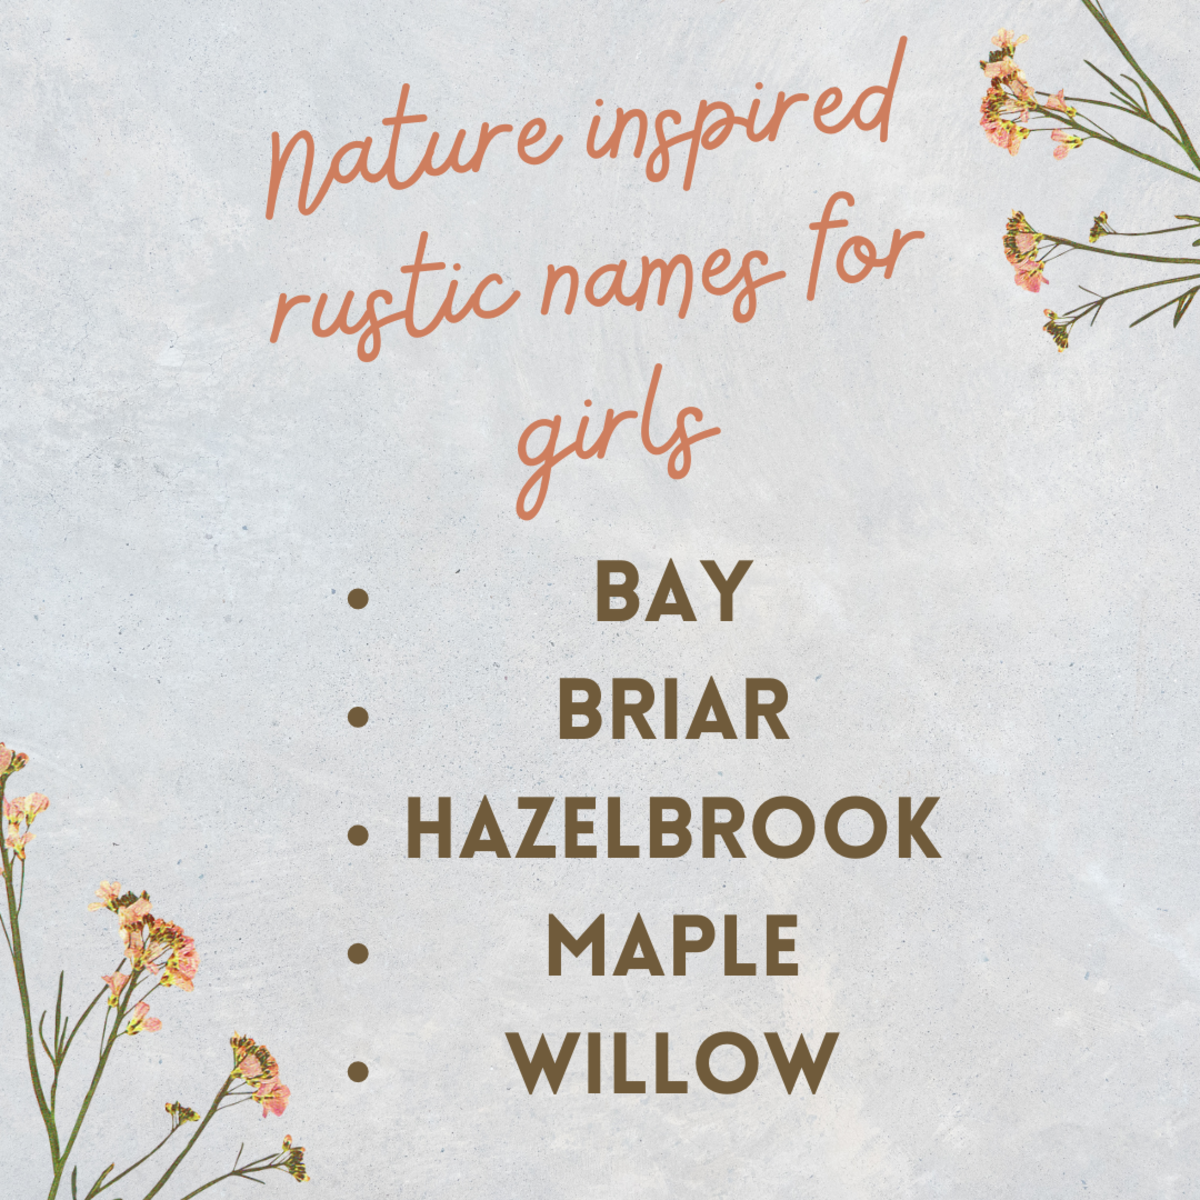 Bay, Briar, Hazelbrook, Maple and Willow are 5 nature-inspired rustic baby names for your baby girl.